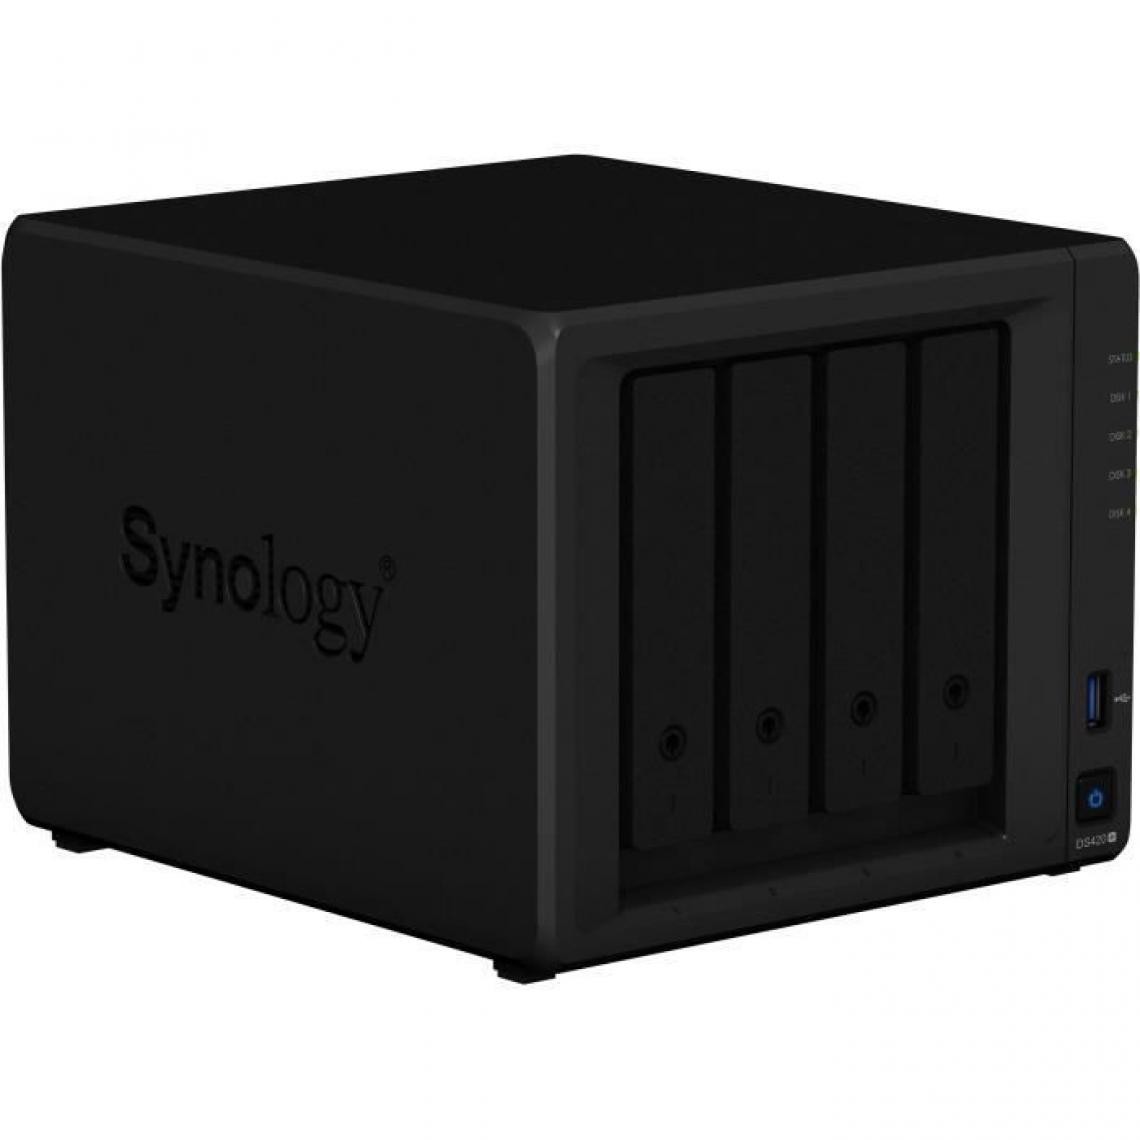 Synology - SYNOLOGY - Serveur de Stockage (NAS) - DS420+ - 4 Baies - Boitier nu - NAS